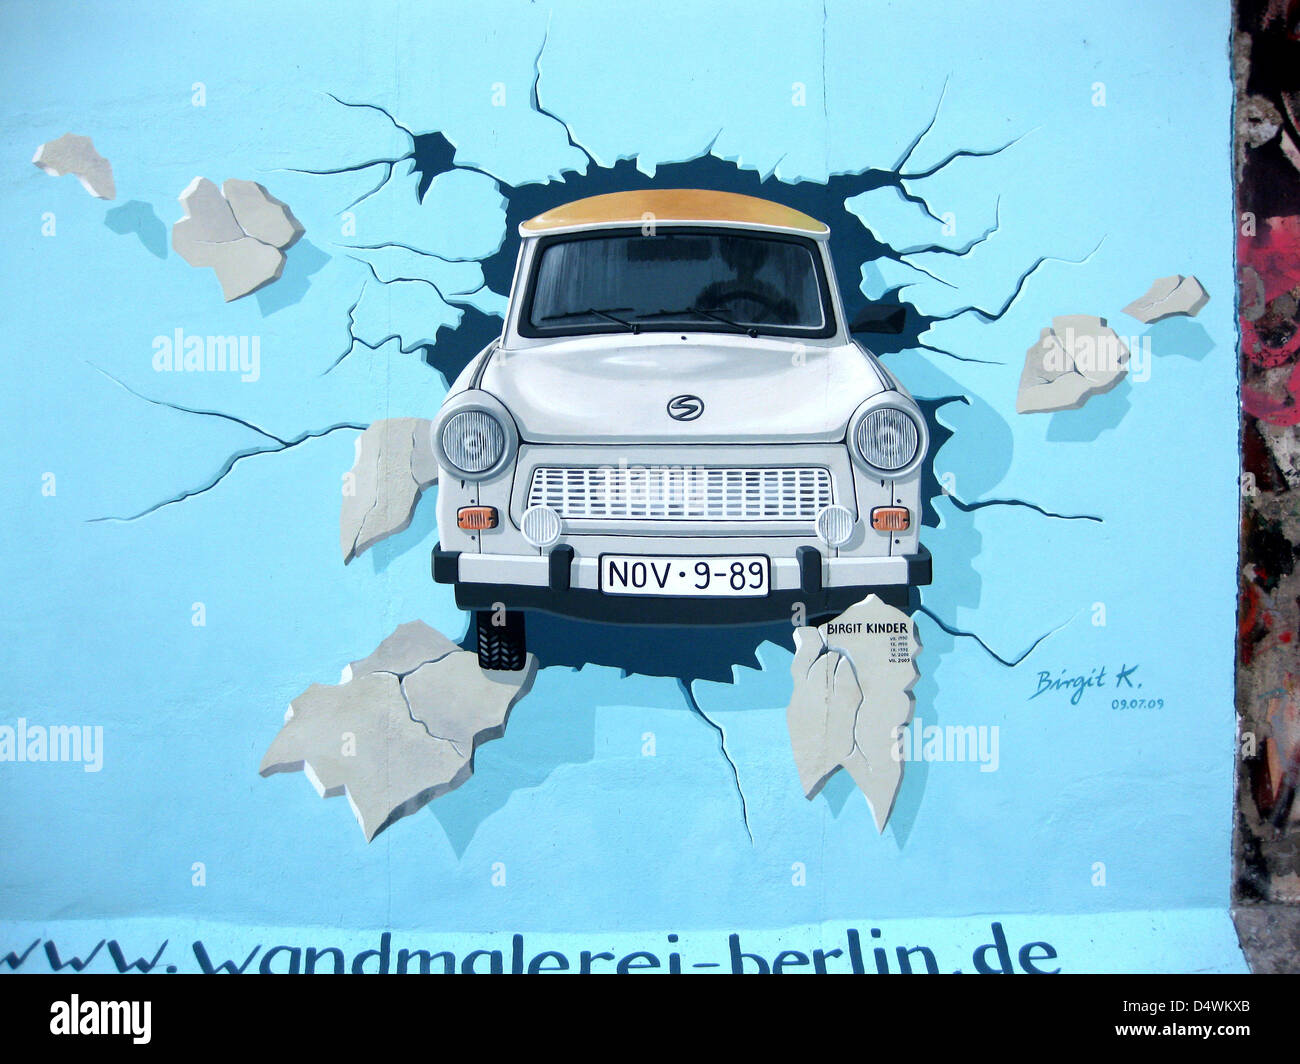 The artwork by Birgit Kinder, 'Test The Rest', is pictured on a section of the Berlin Wall at the East Side Gallery on Mühlenstrasse in Berlin, Germany, in August 2009. The concrete parts of the Berlin Wall between Ostbahnhof and Warschauer Strasse were painted by international artists after the opening of the inner-German border in November 1989. Photo: Dieter Palm Stock Photo